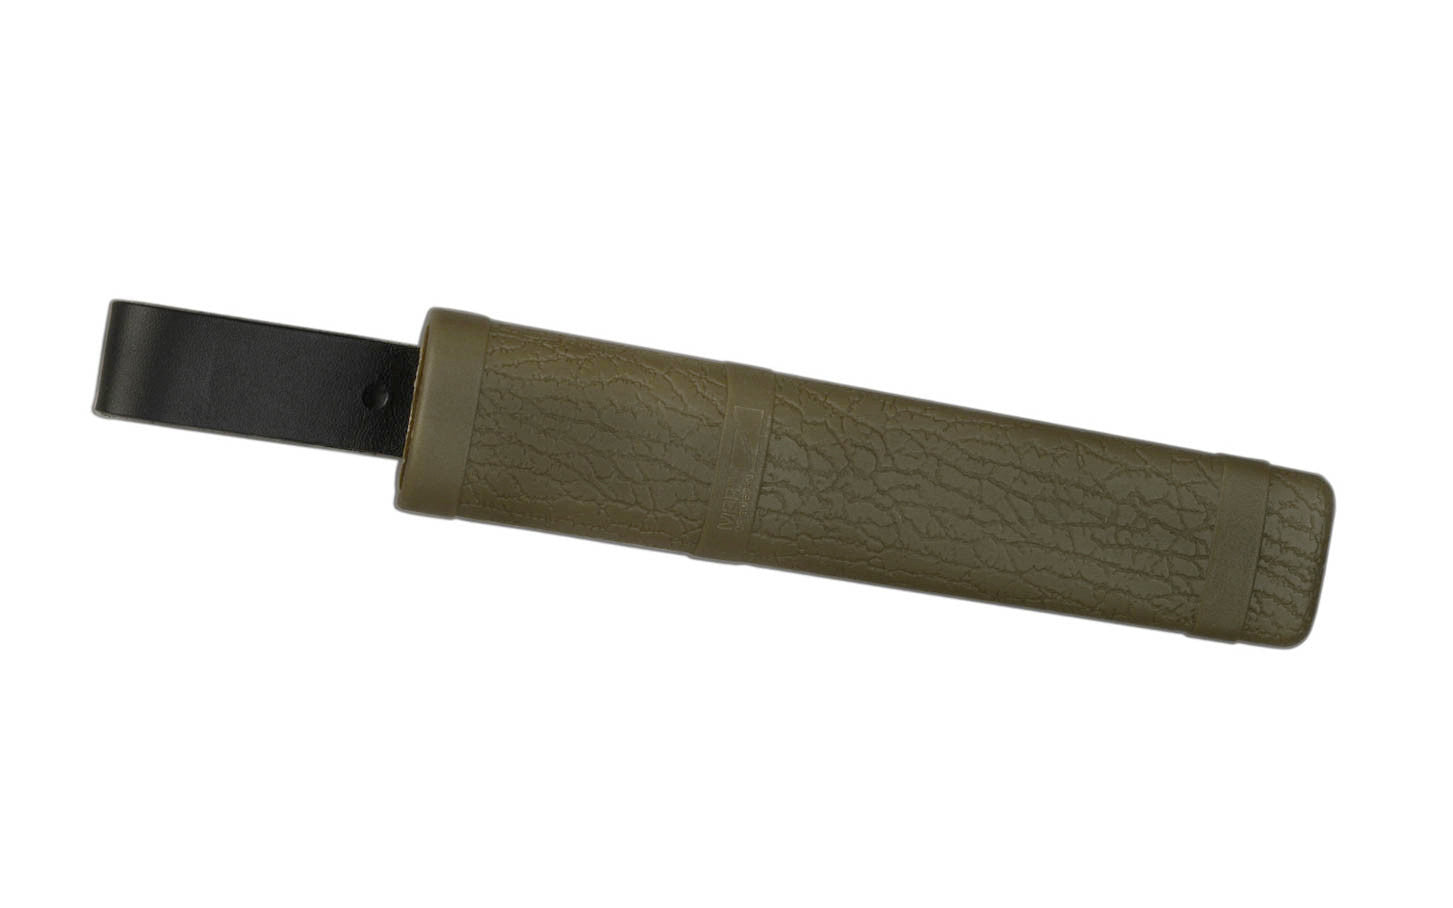 Sheath for Mora of Sweden Stainless "Outdoor 2000" Knife